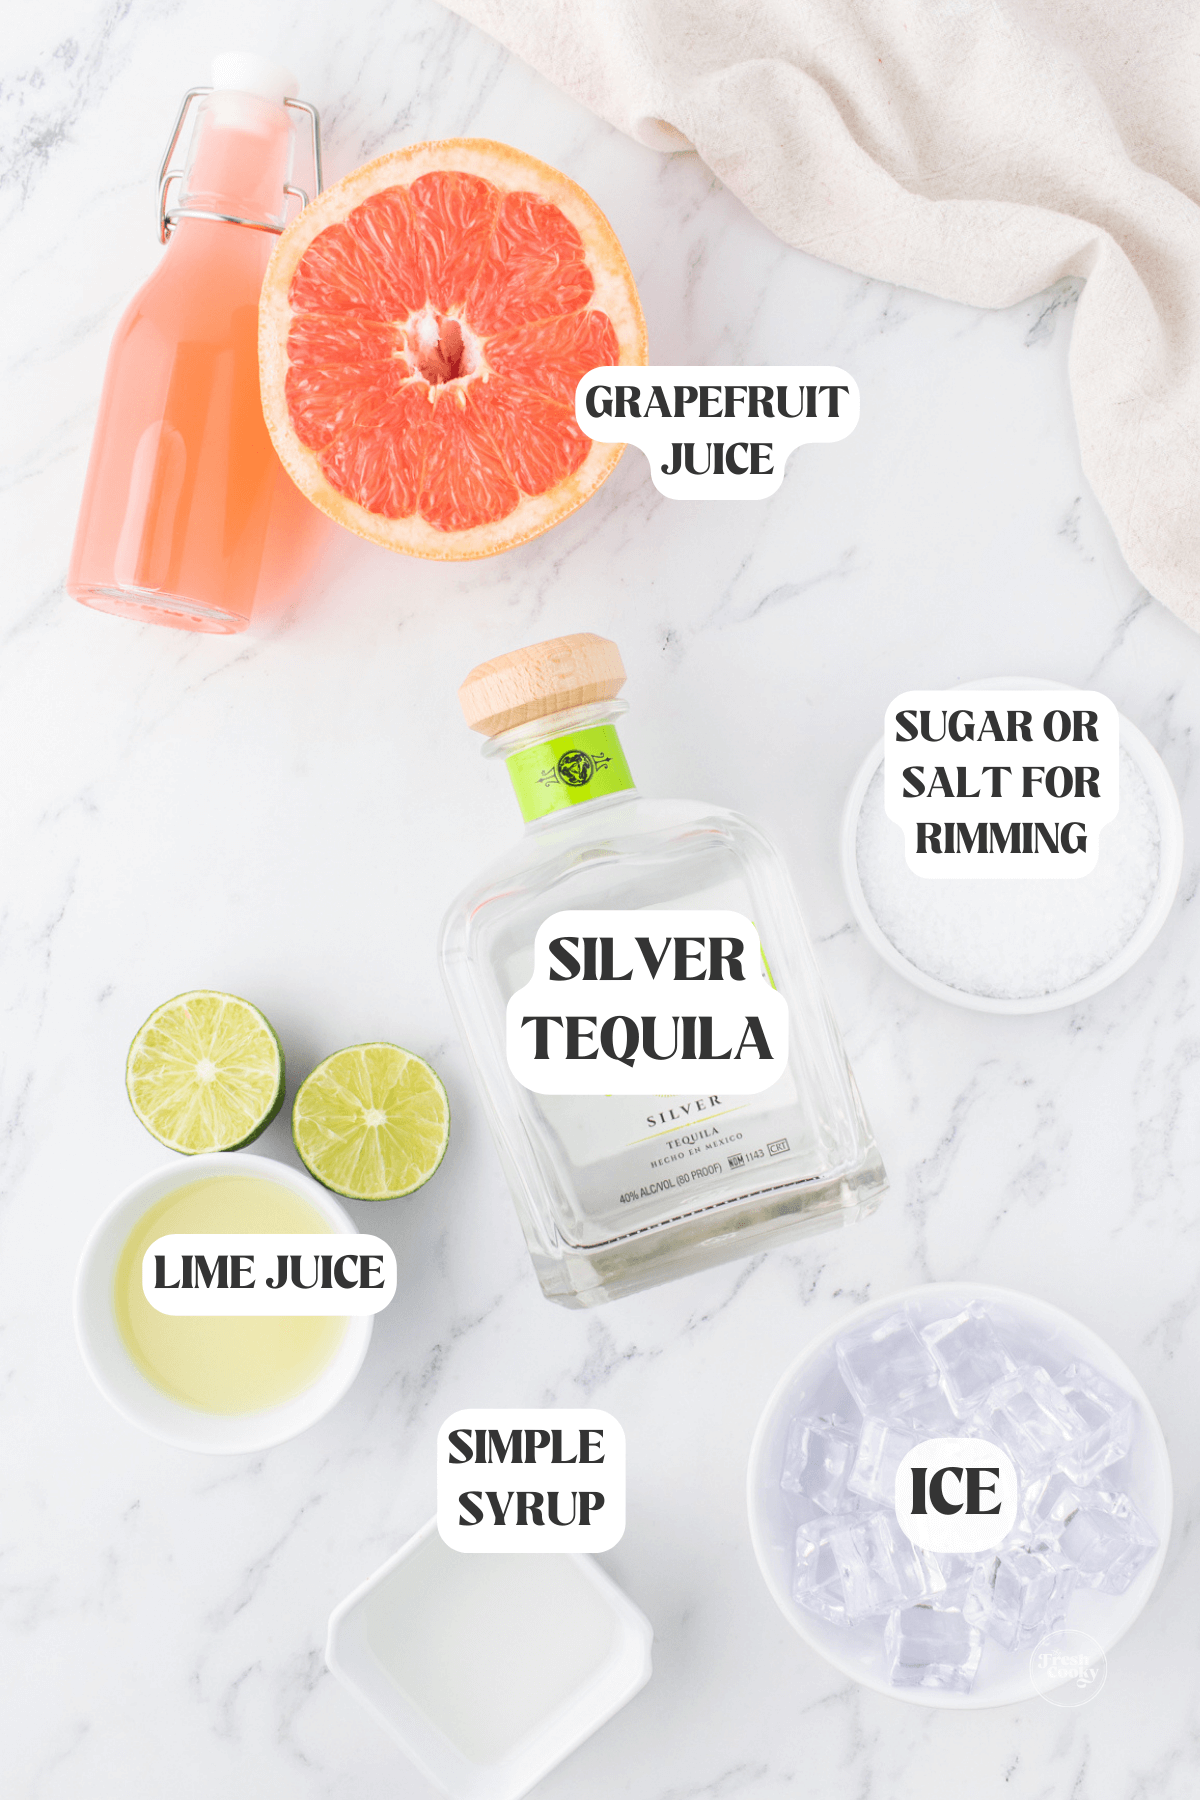 Labeled ingredients for frozen paloma cocktail.